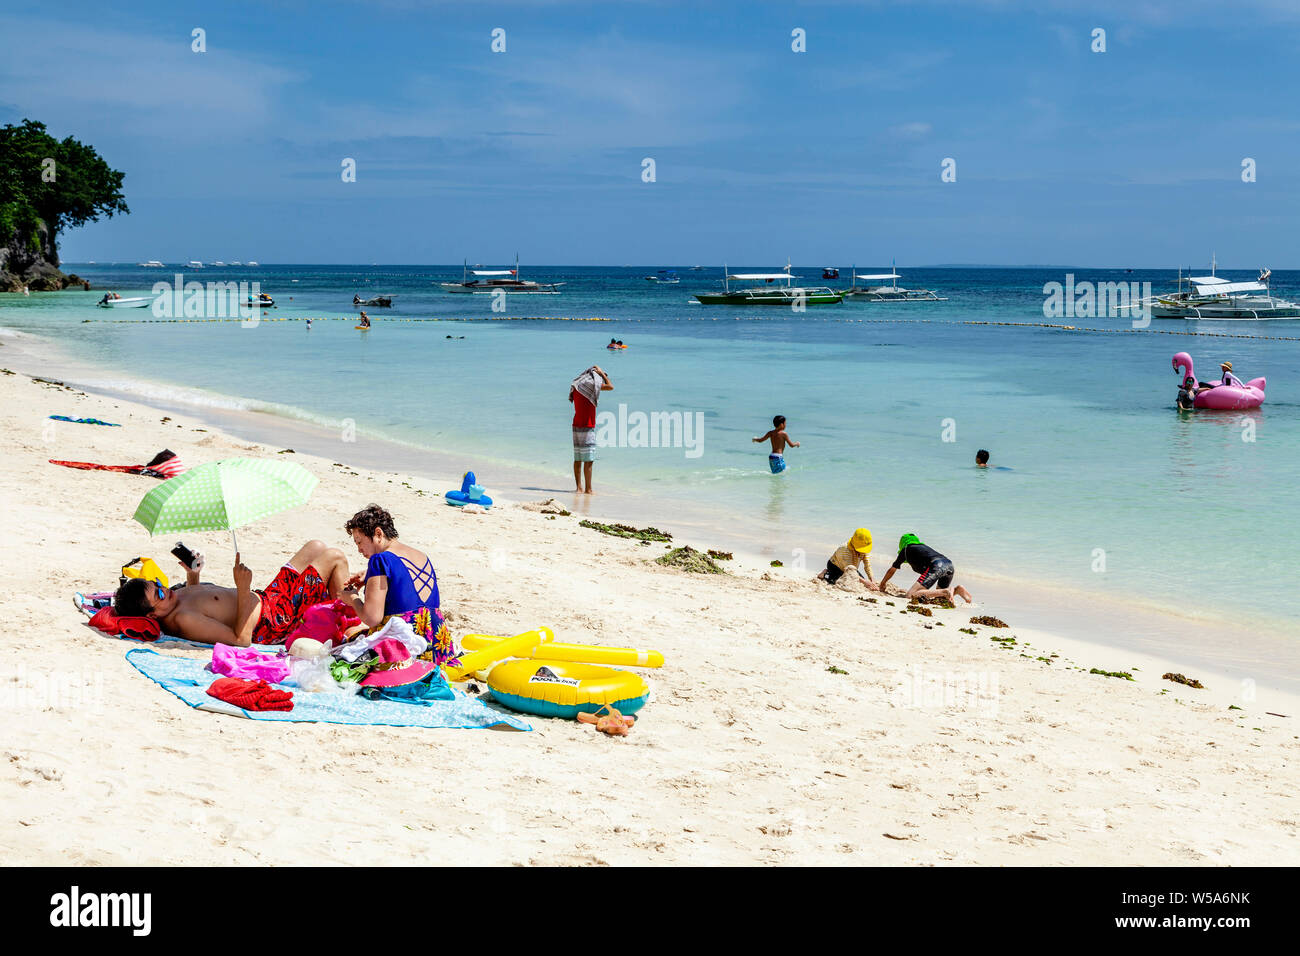 A Family Relaxing On Alona Beach, Bohol, The Philippines Stock Photo